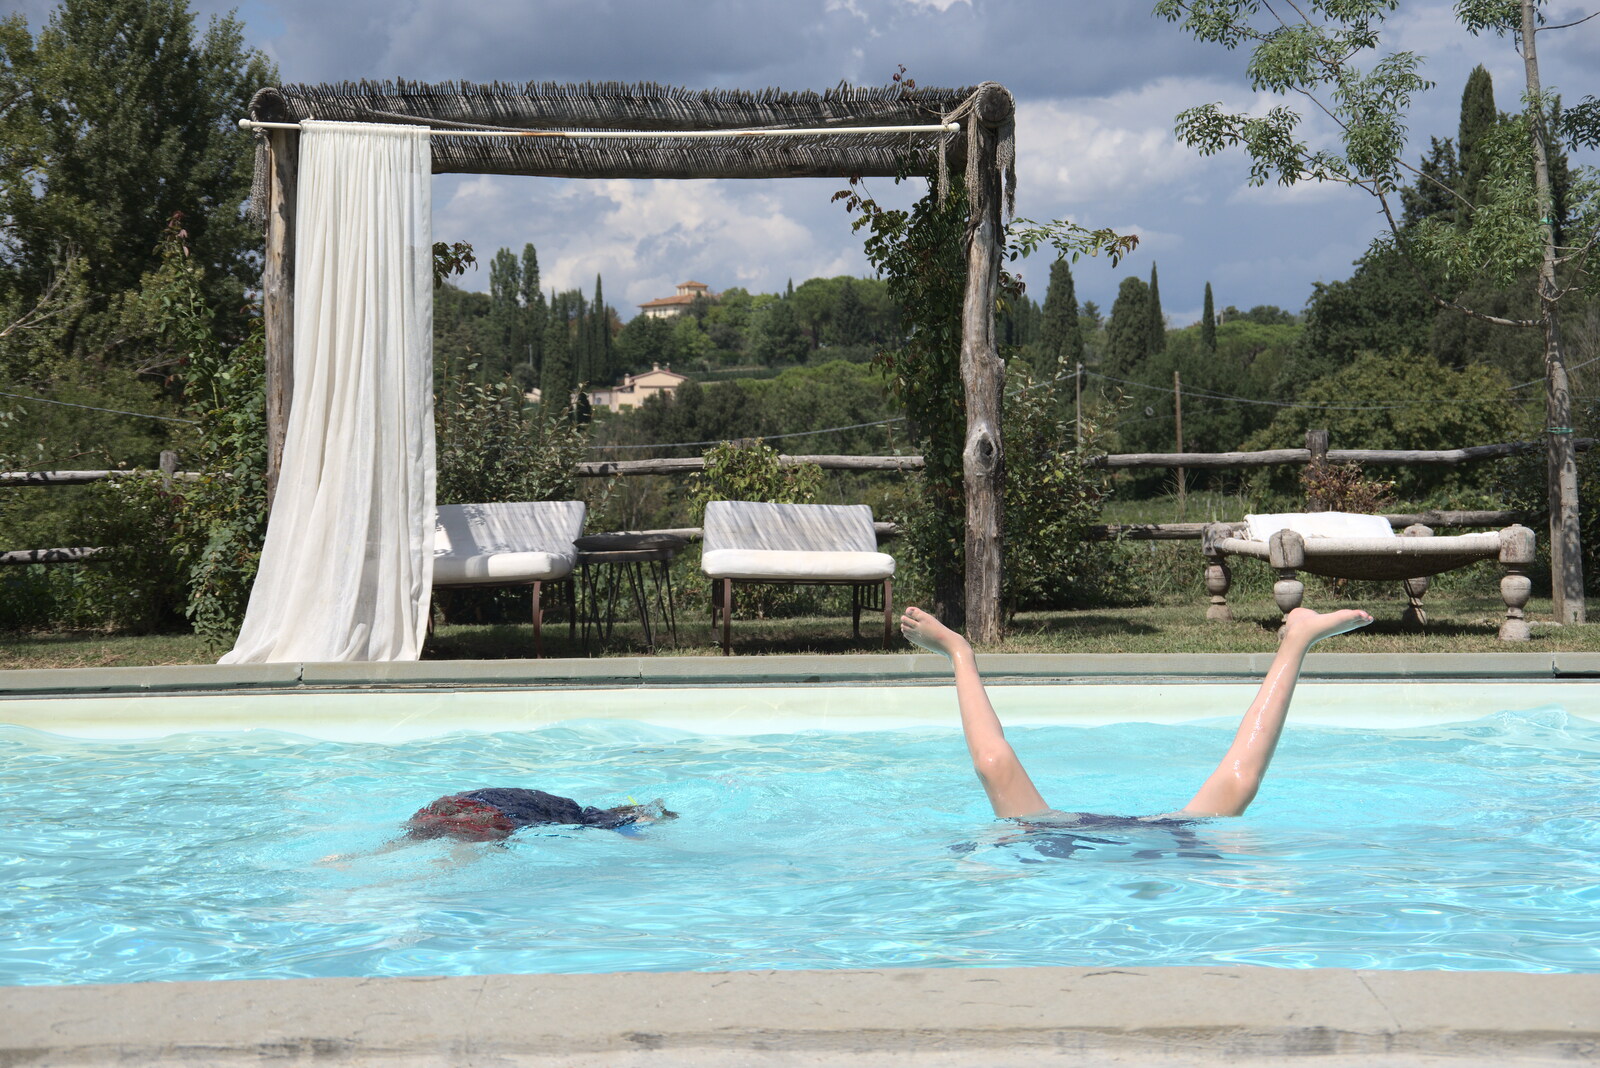 Castiglio Del Lago and Santuario della Verna, Umbria and Tuscany, Italy - 1st September 2022: Fred does hand stands in the swimming pool